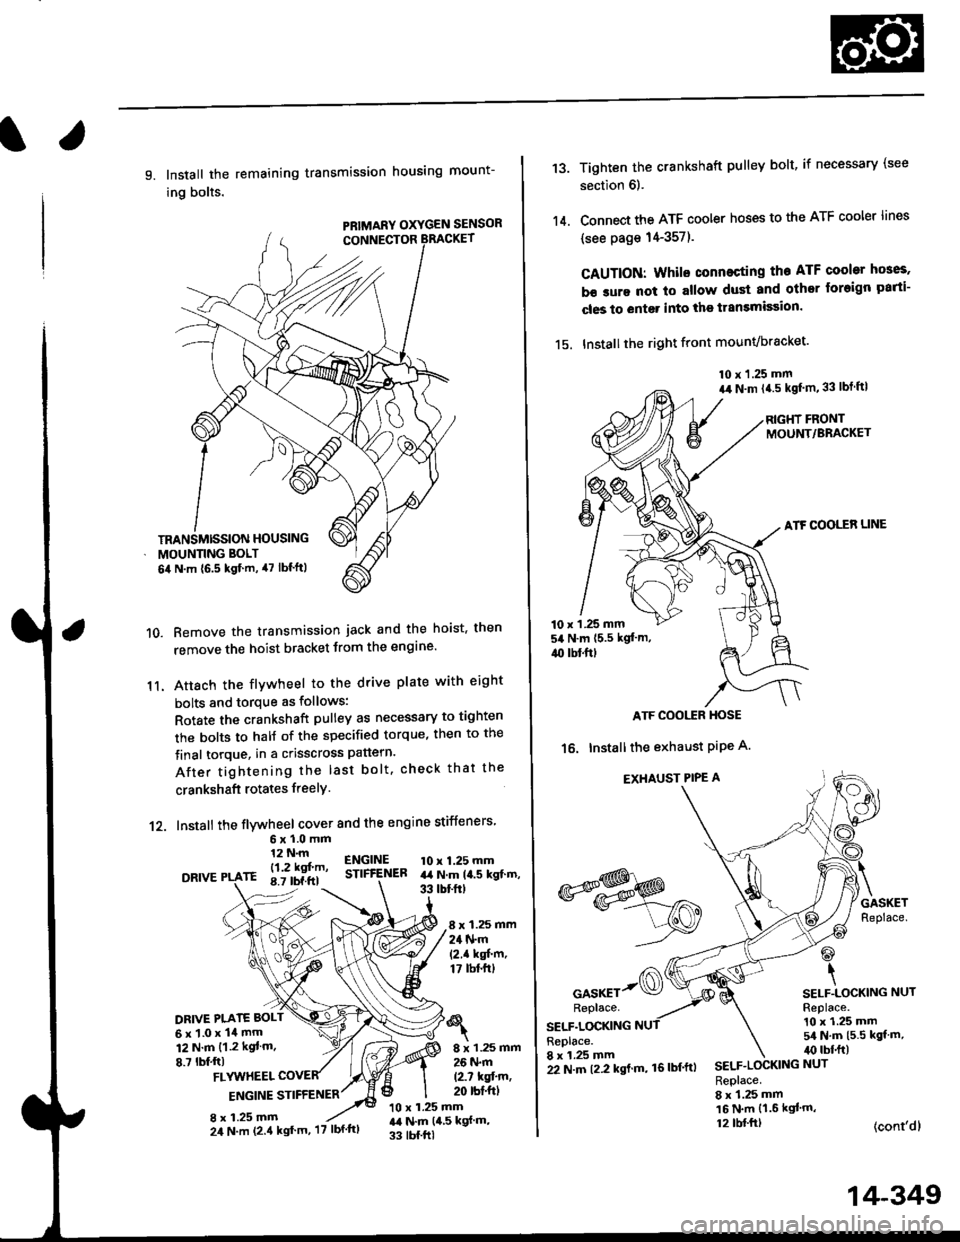 HONDA CIVIC 1996 6.G User Guide l.
9. Install the remaining transmission housing mount-
ing bolts.
PRIMARY OXYGEN SENSOR
Remove the transmission jack and the hoist. then
remove the hoist bracket from the engine
Attach the flvwheel 